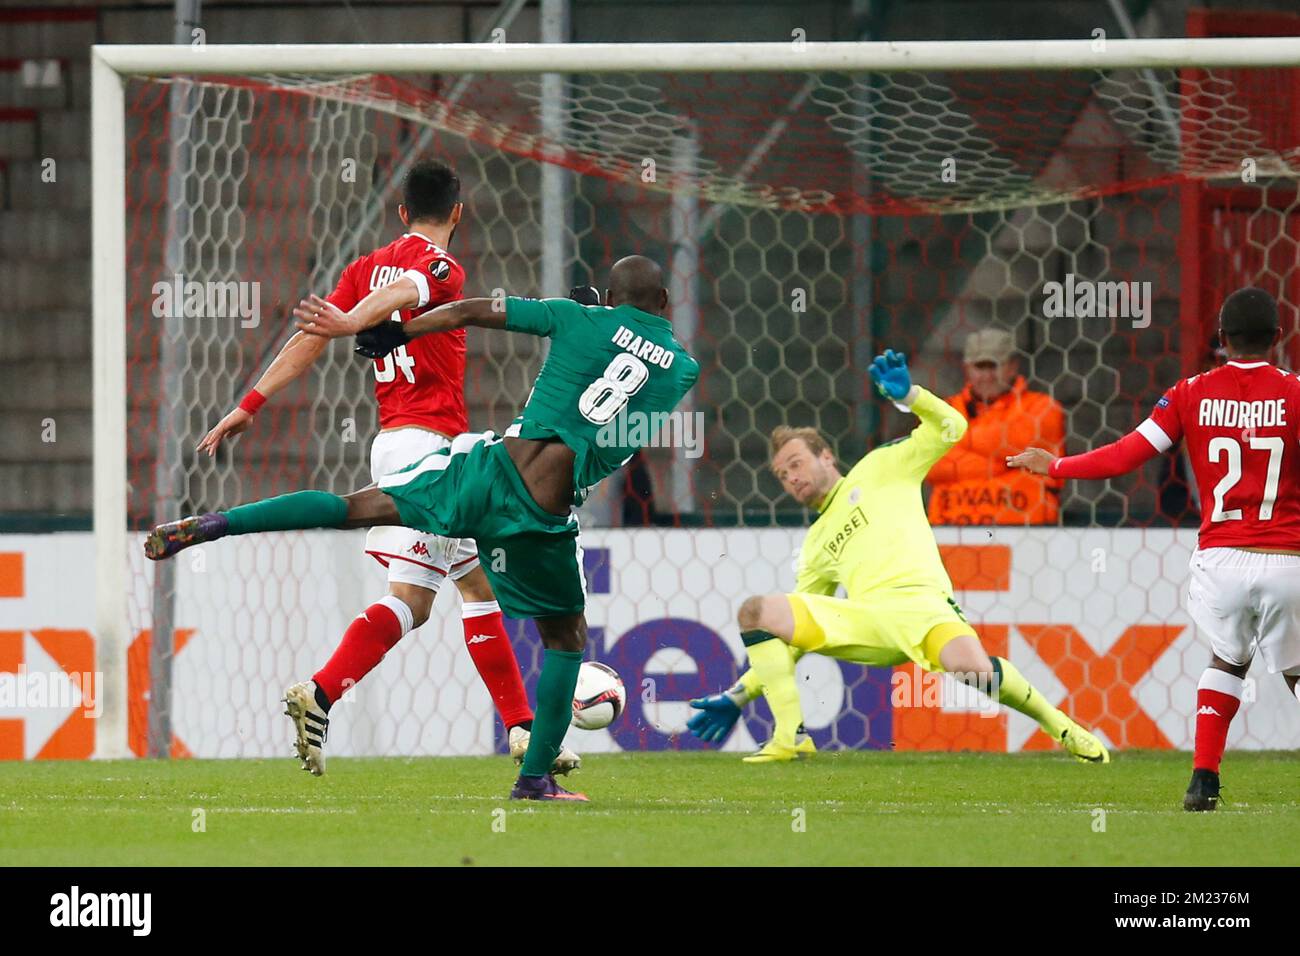 Panathinaikos' forward Victor Ibarbo scores a goal during a third game of the group stage (group G) of the Europa League competition between Belgian soccer team Standard de Liege and Greek soccer team Panathinaikos, Thursday 20 October 2016, in Liege. BELGA PHOTO BRUNO FAHY Stock Photo